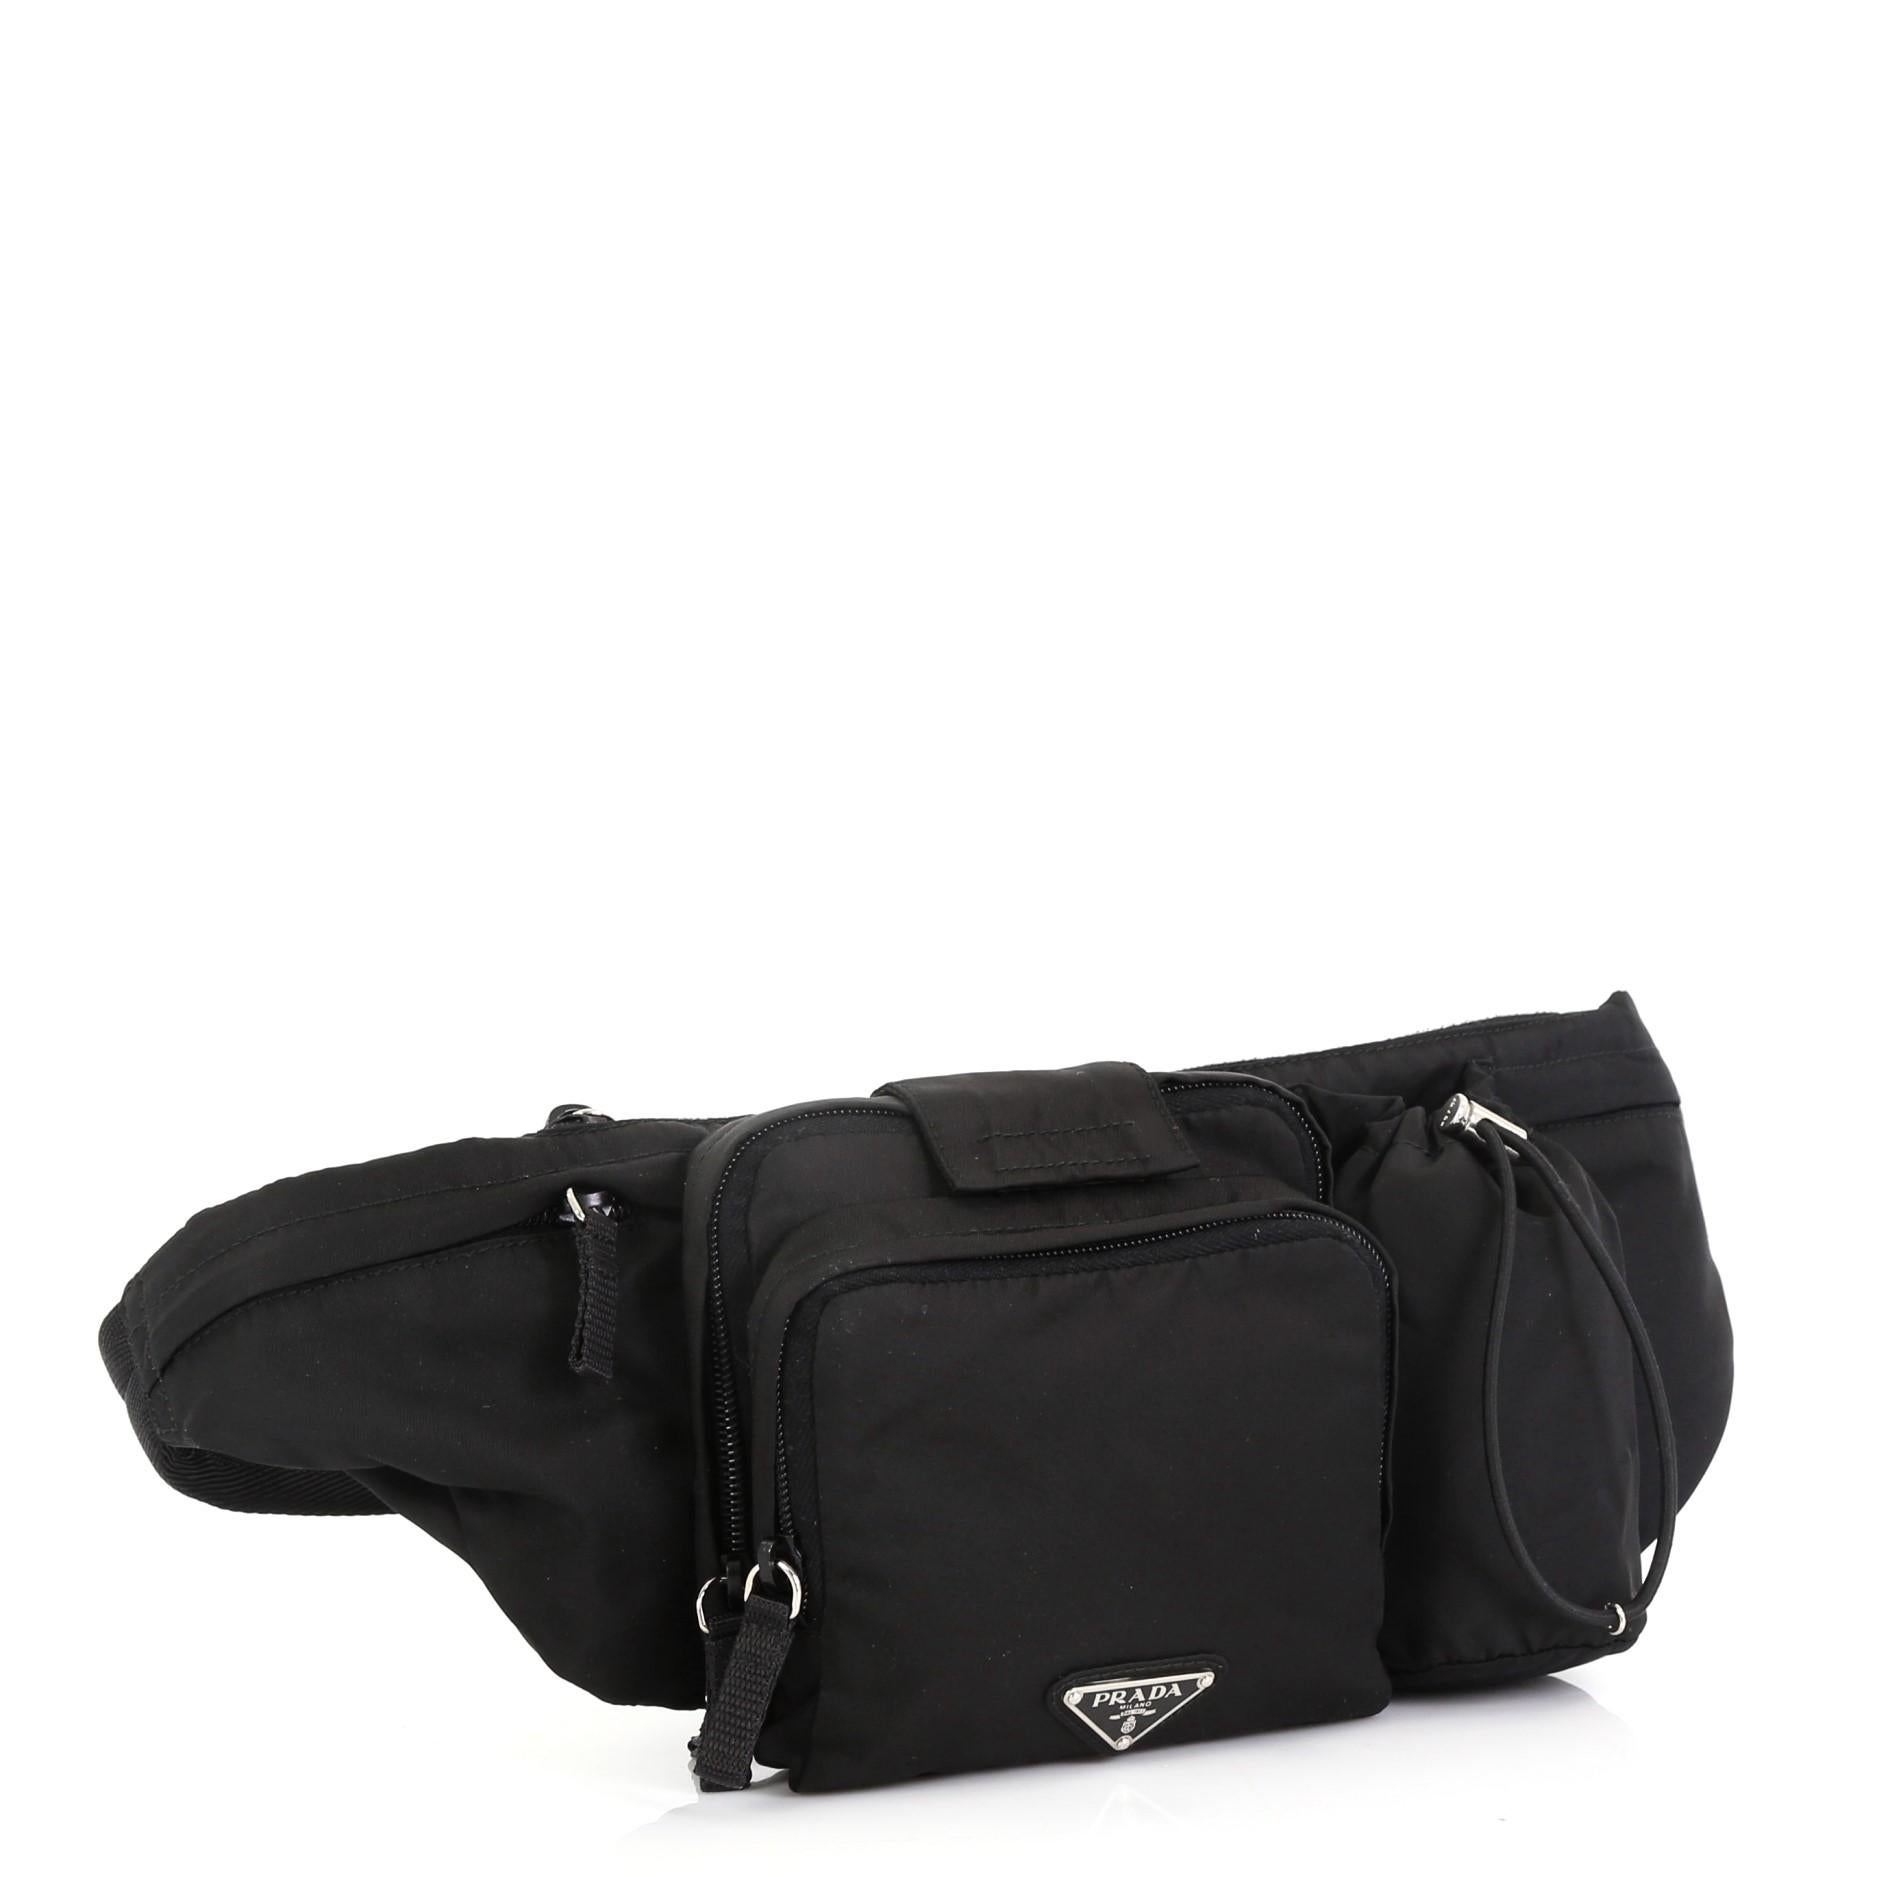 This Prada Convertible Multipocket Belt Bag Tessuto Medium, crafted in black tessuto nylon, features an adjustable belt strap, and silver-tone hardware. It opens to a black fabric interior. 

Estimated Retail Price: $807
Condition: Excellent. Faint